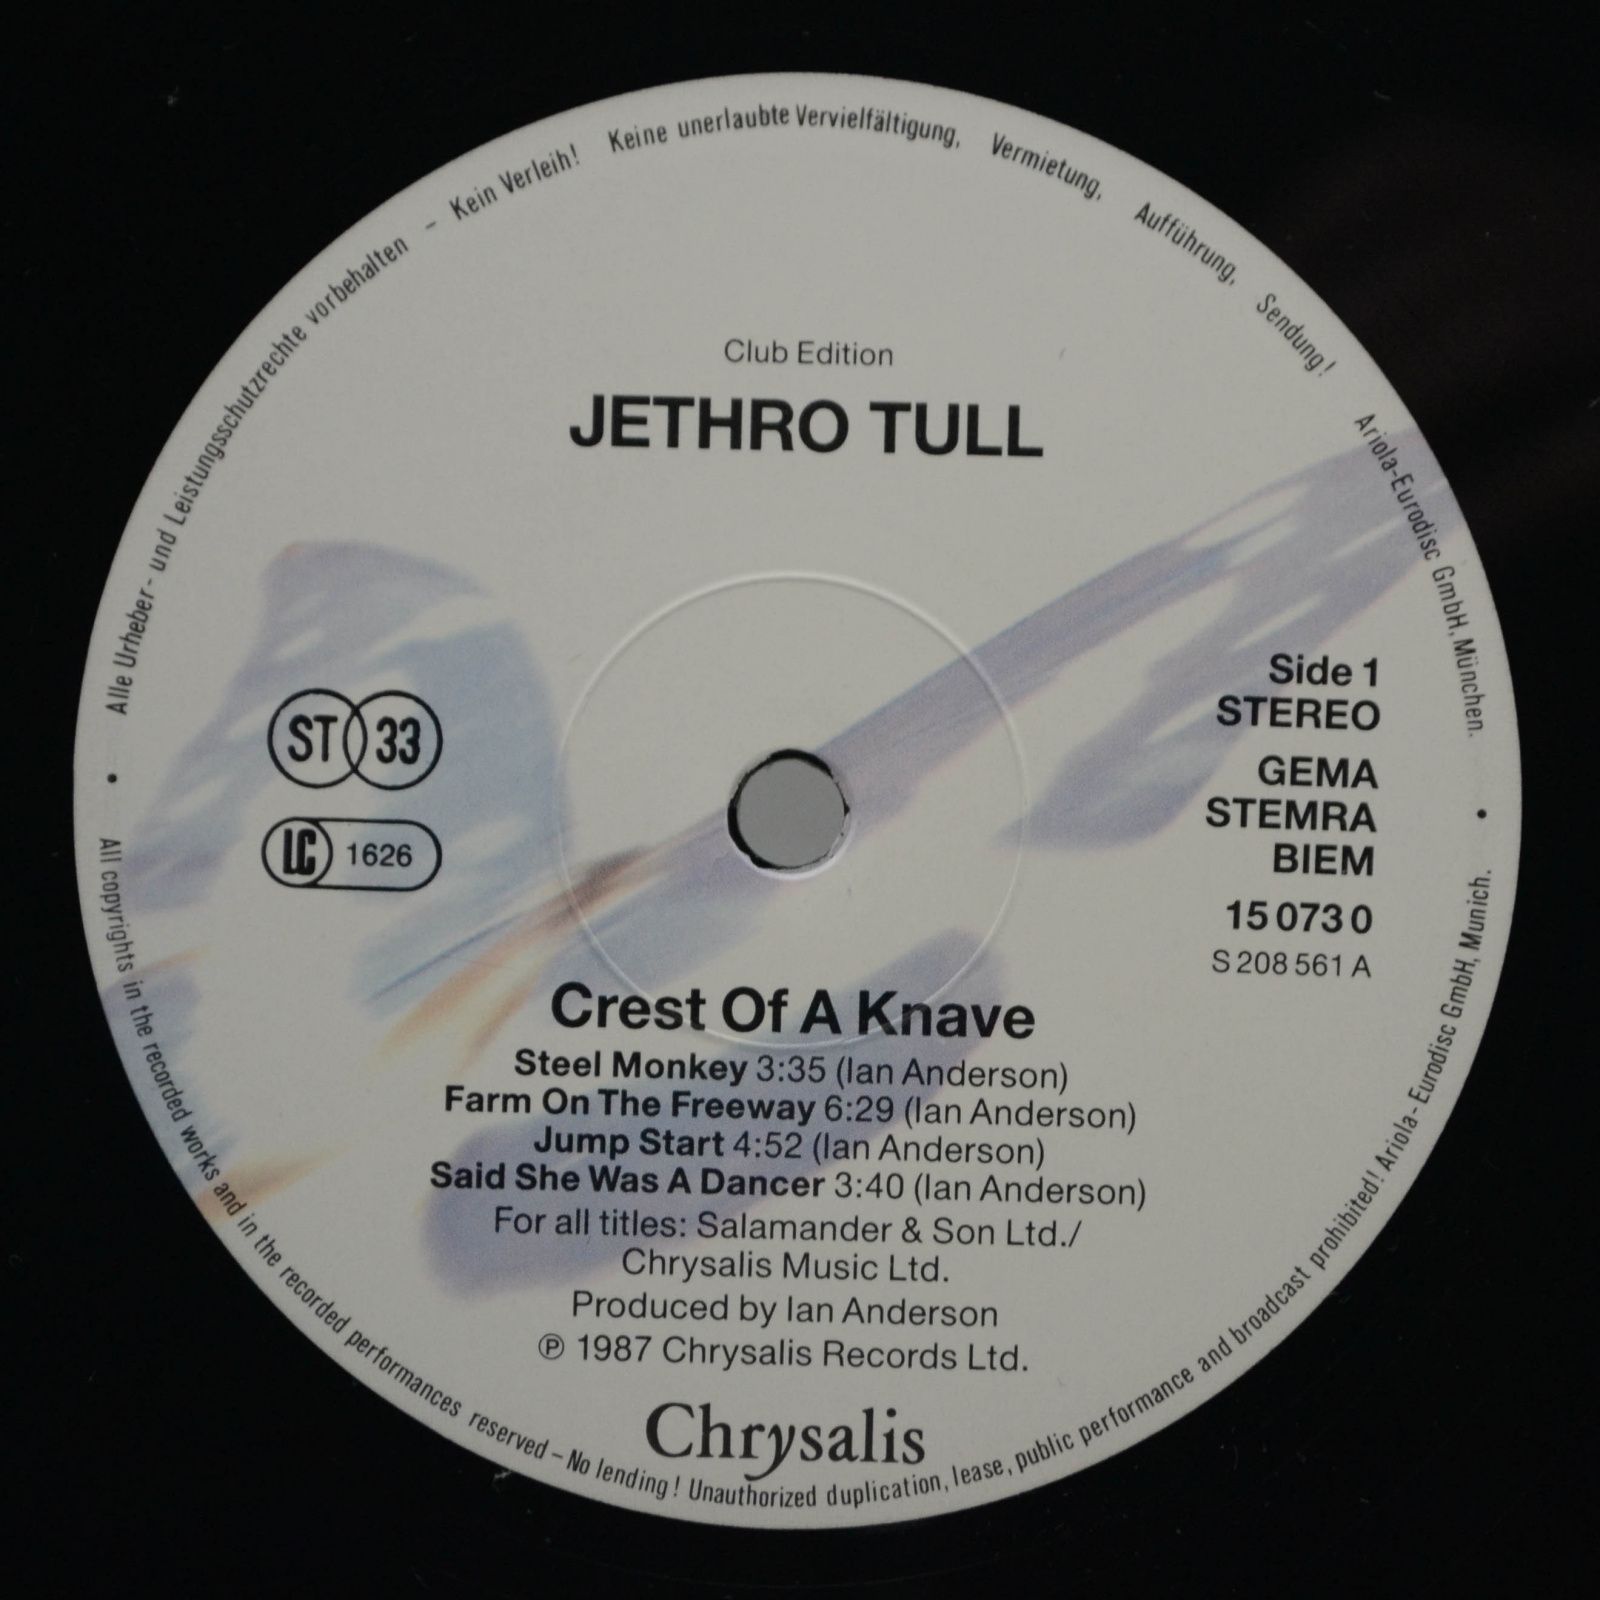 Jethro Tull — Crest Of A Knave, 1987